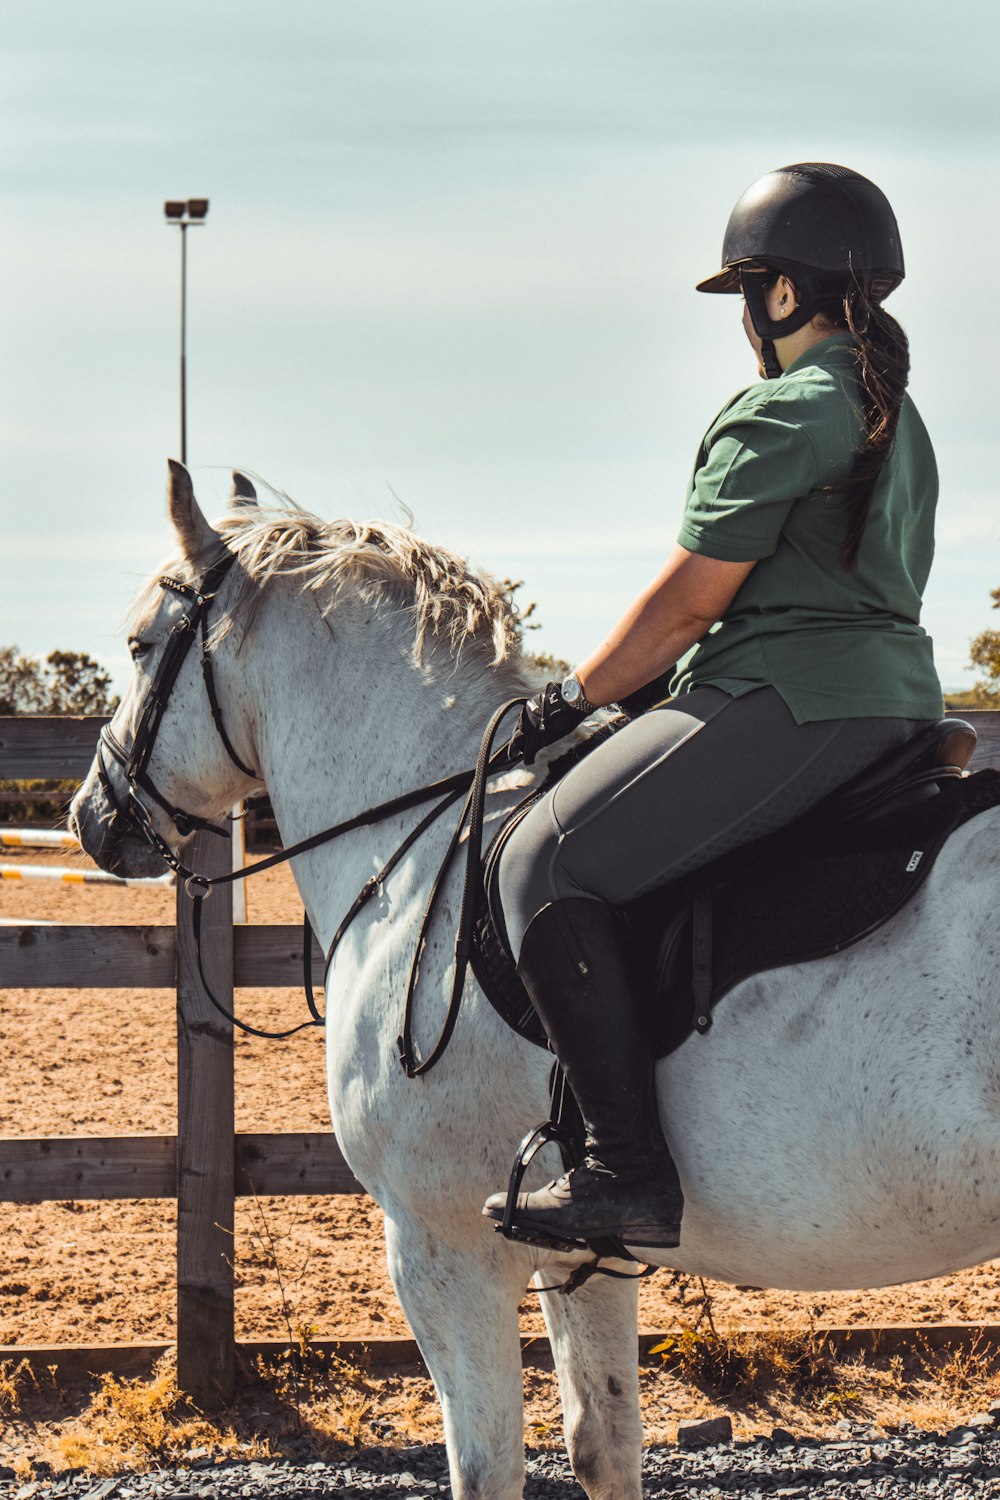 woman in green shirt riding white horse during daytime